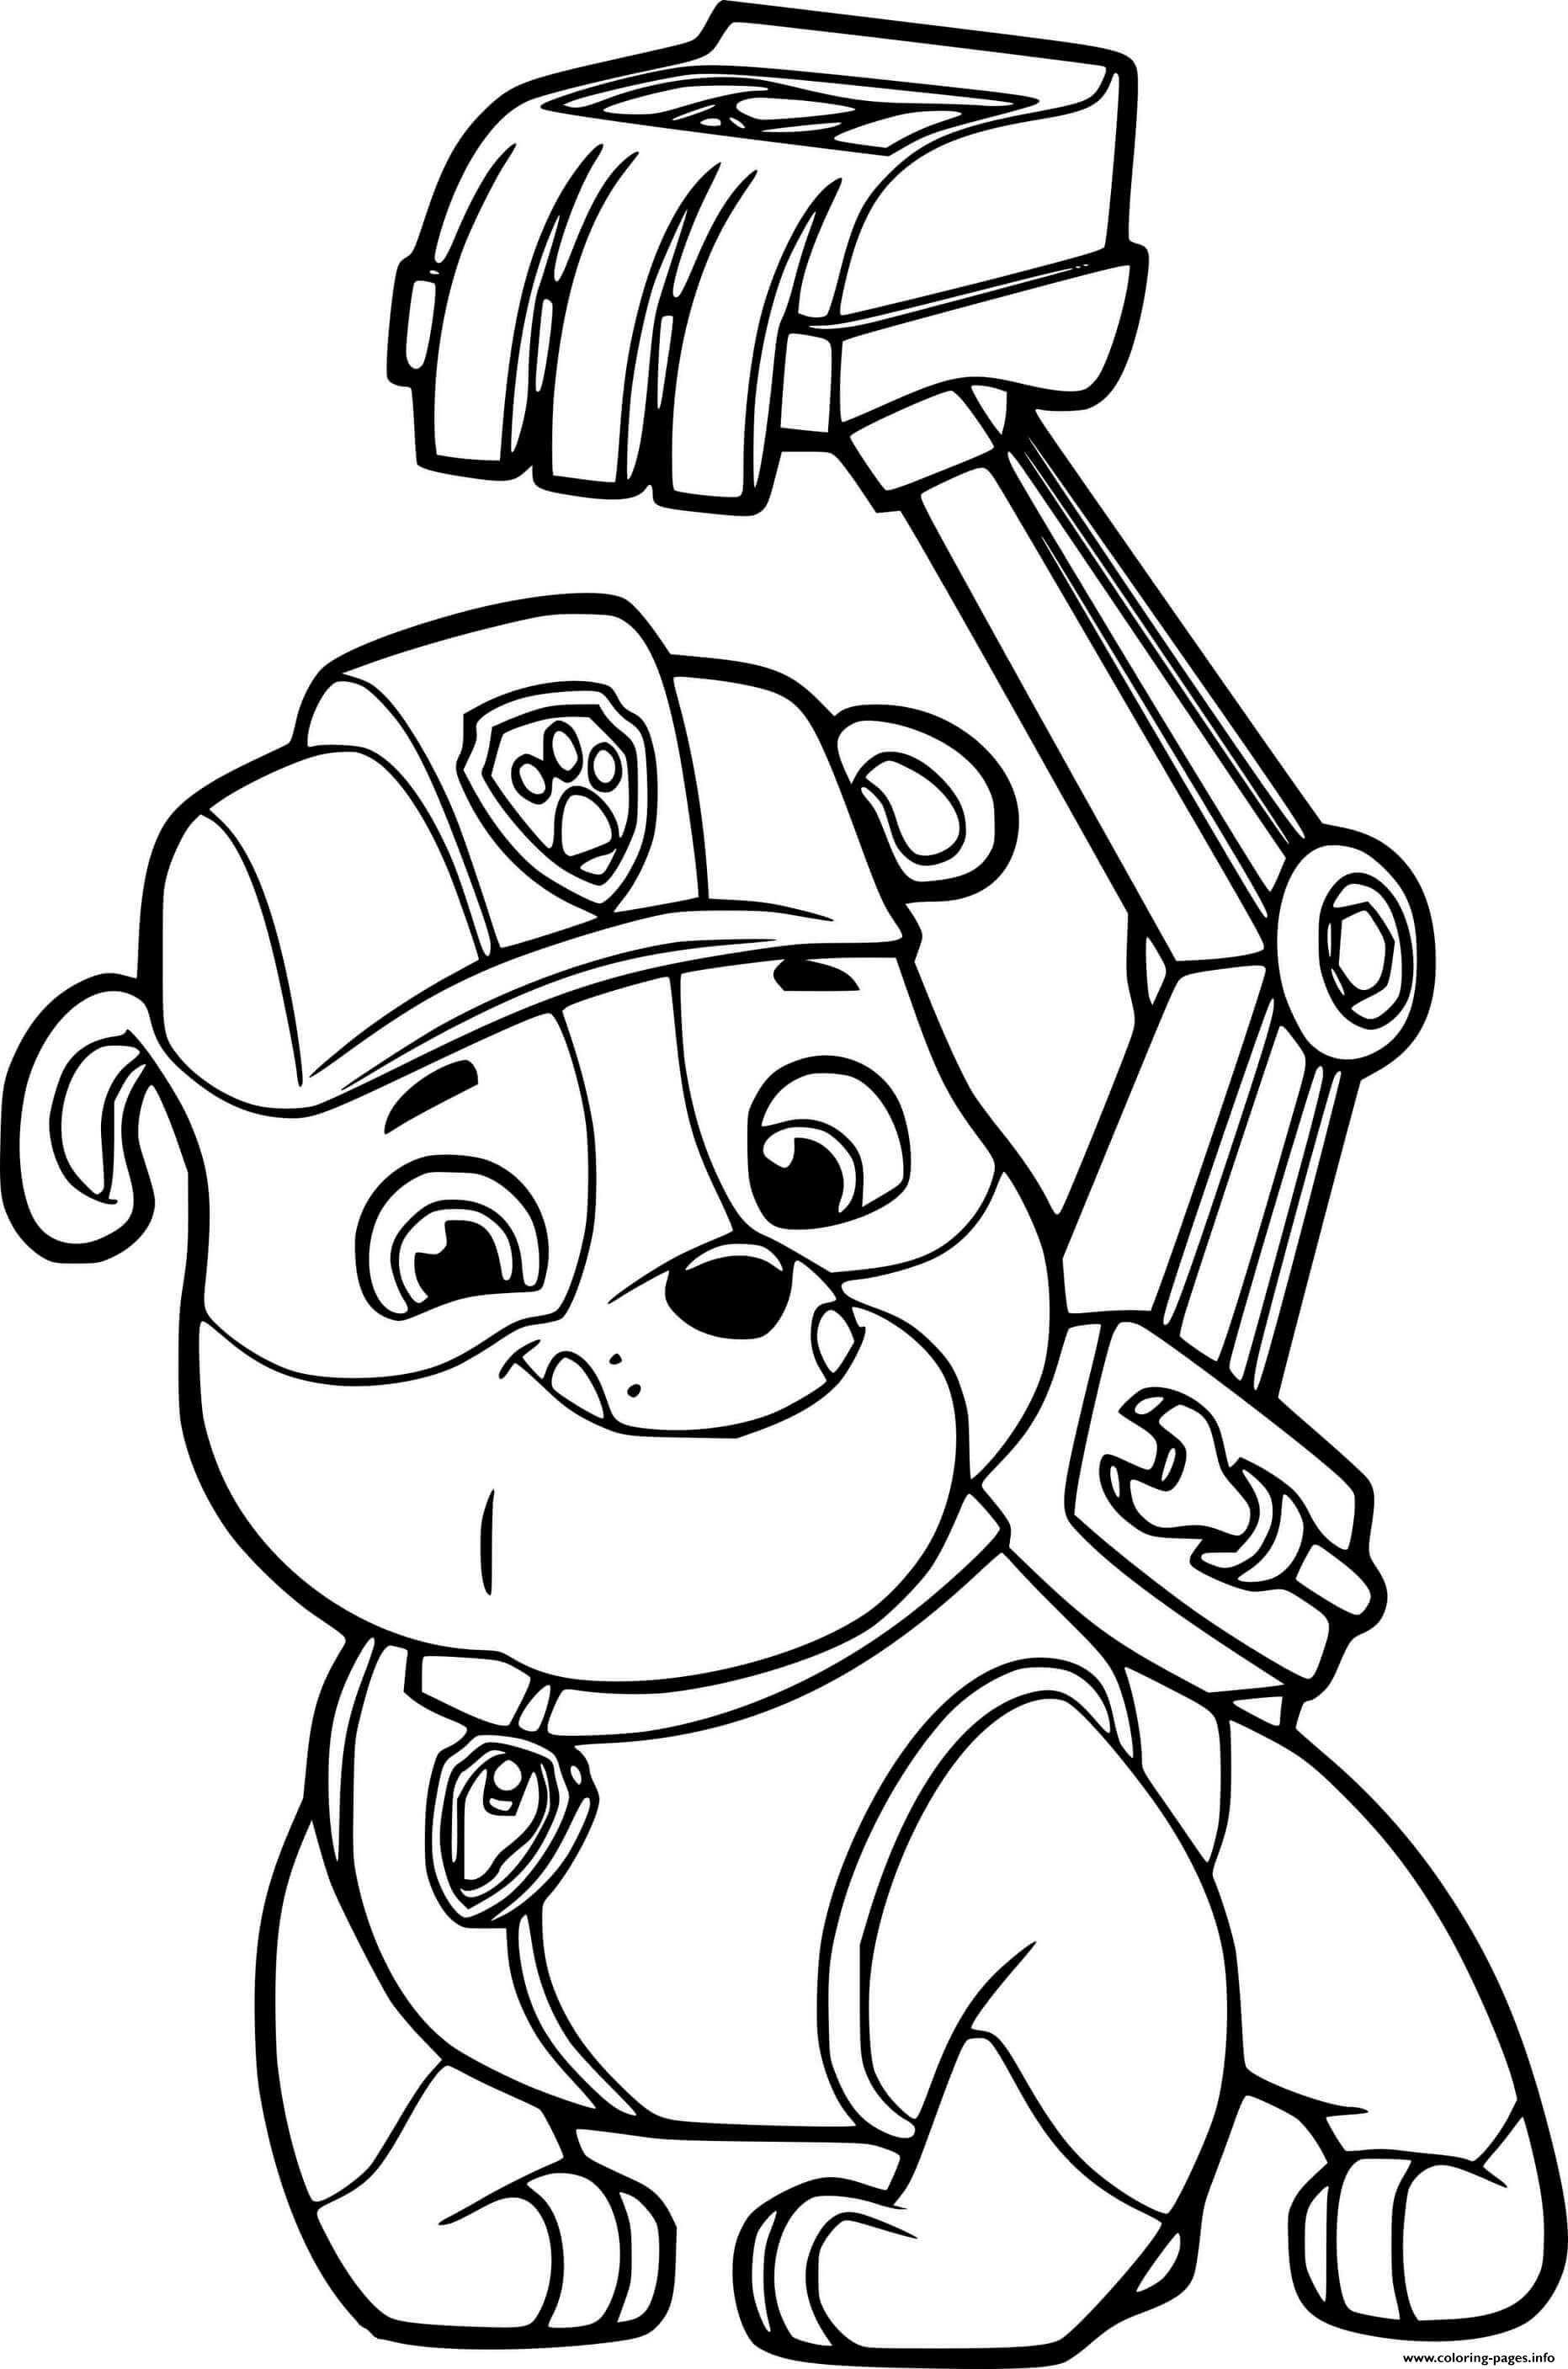 Rubble and his digger equipment coloring page printable